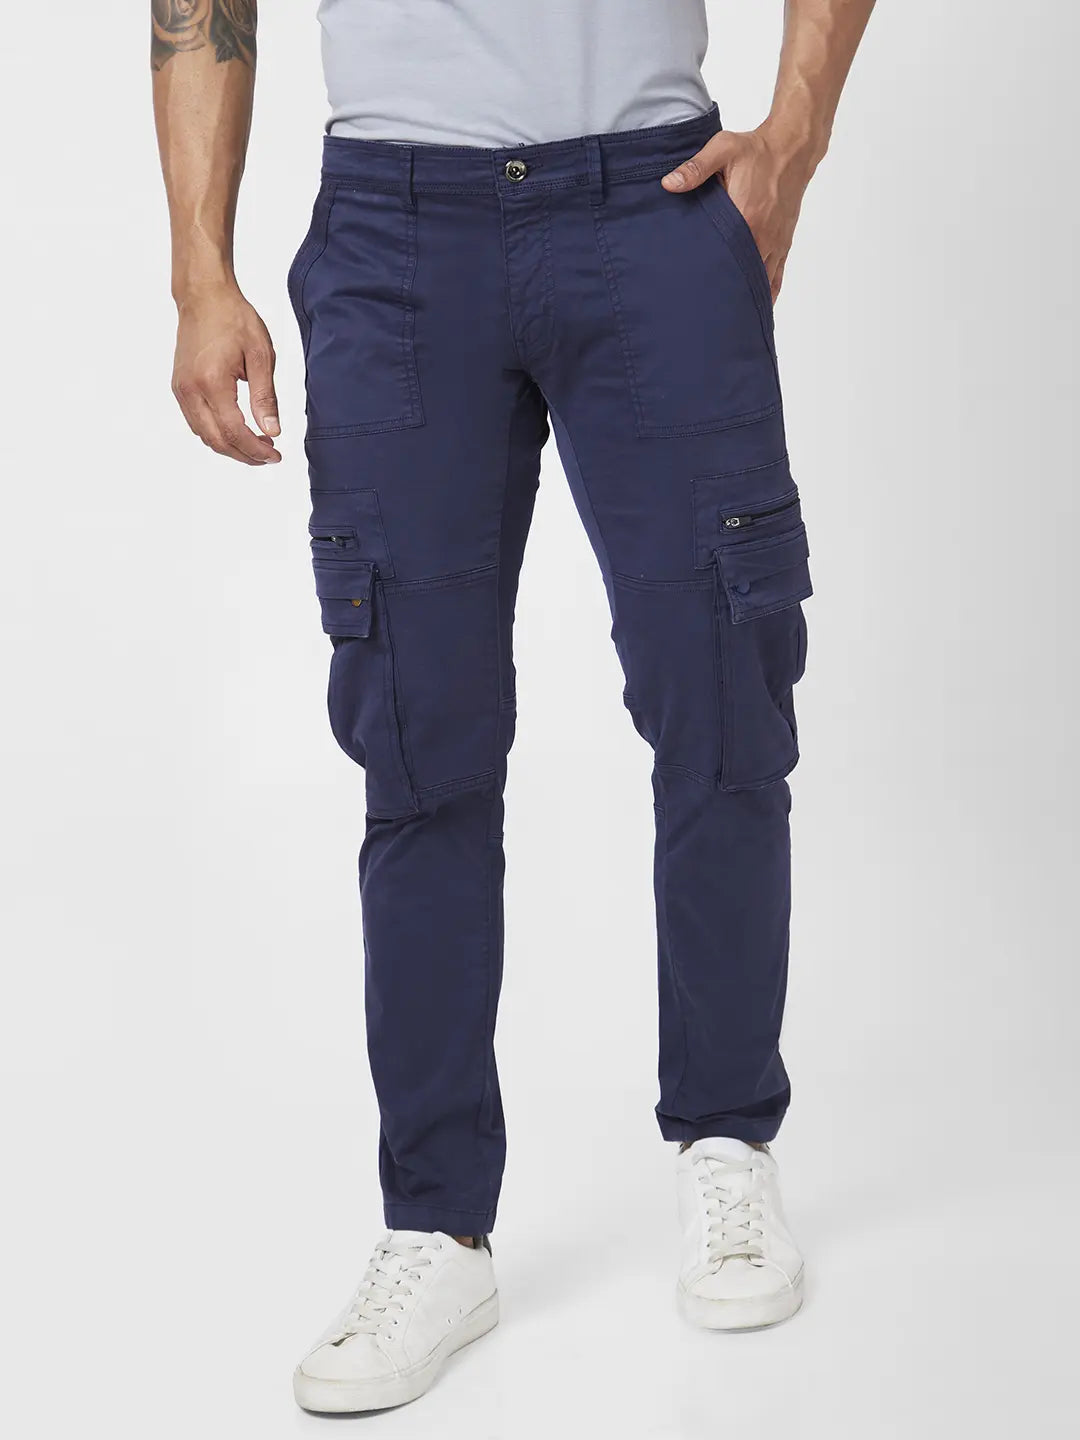 Spykar Men Navy BLue Cotton Tapered Fit Ankle Length Mid Rise Cargo Pant